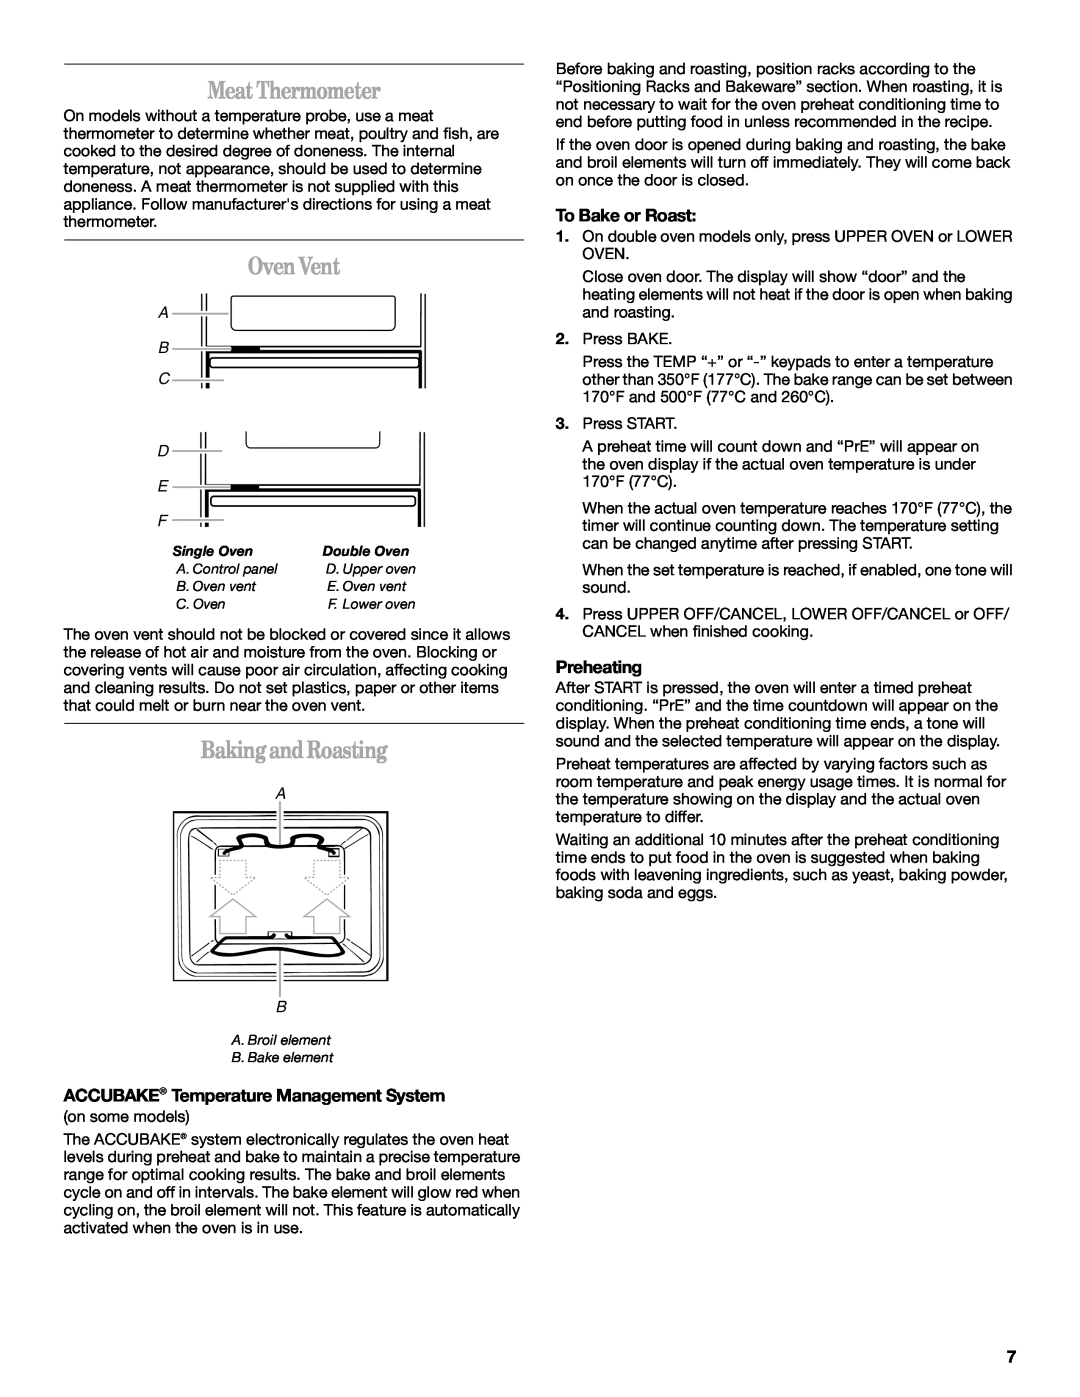 Whirlpool RBS307 MeatThermometer, OvenVent, BakingandRoasting, ACCUBAKE Temperature Management System, To Bake or Roast 